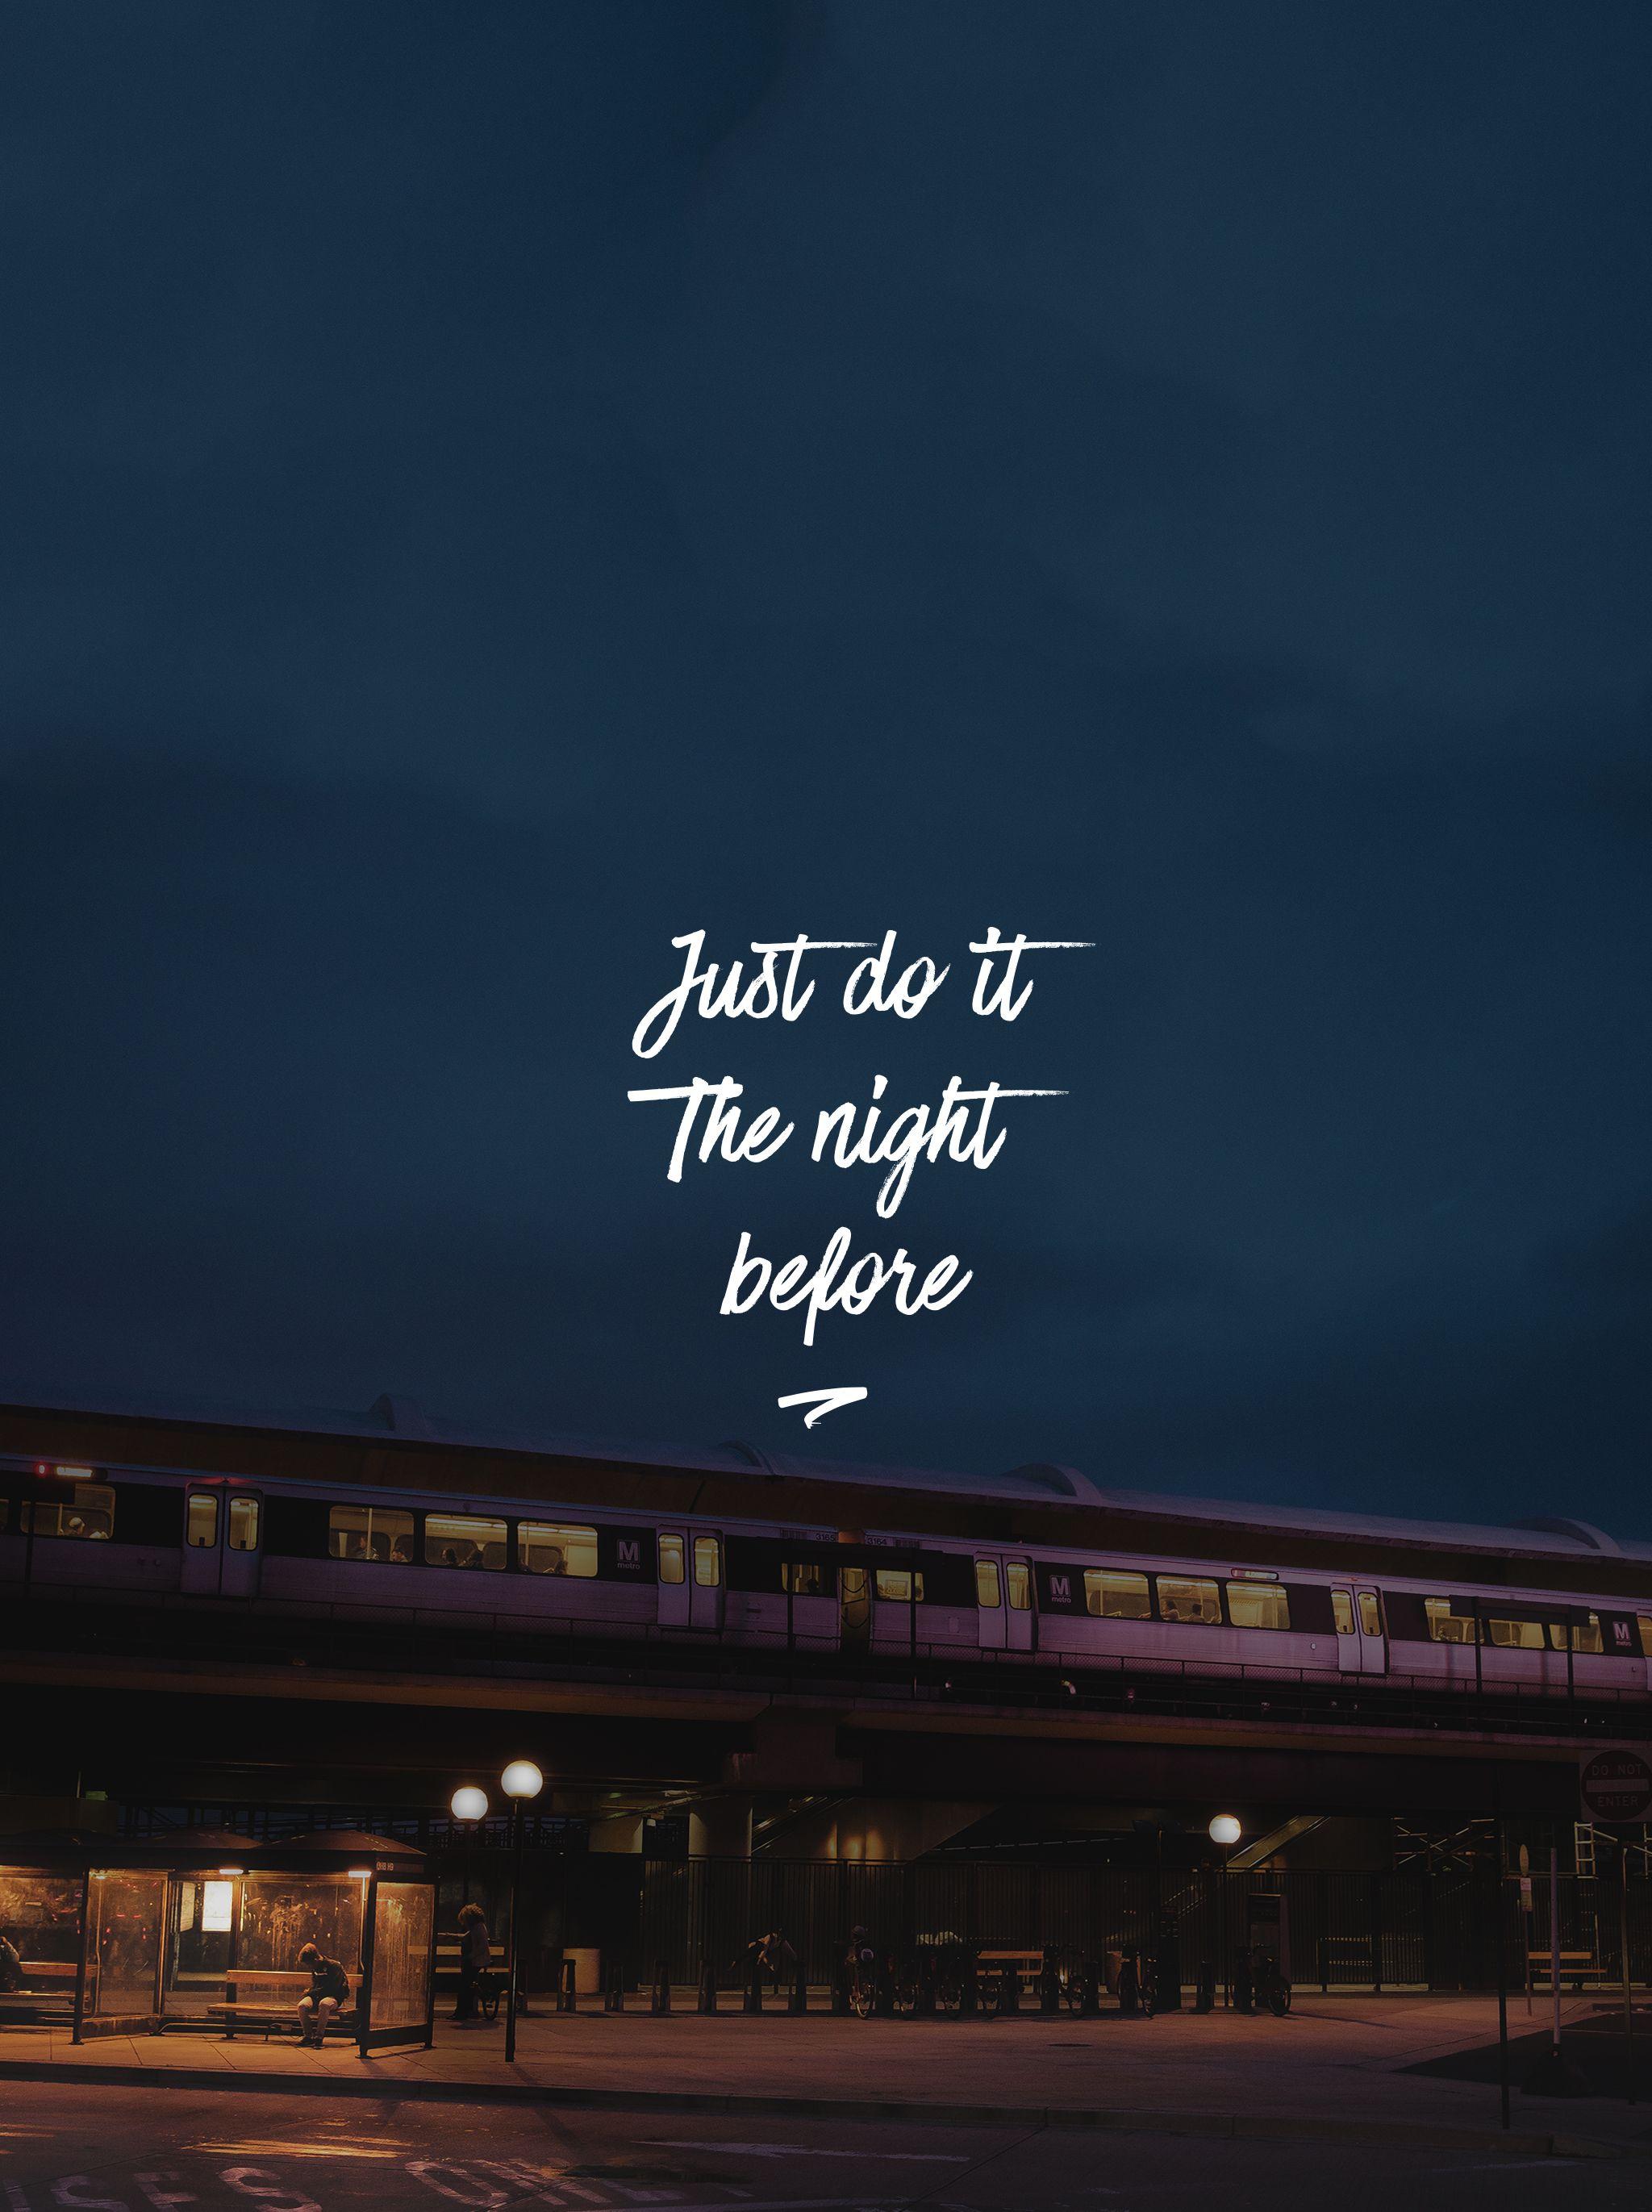 Wallpaper Wednesday: Just Do It The Night Before